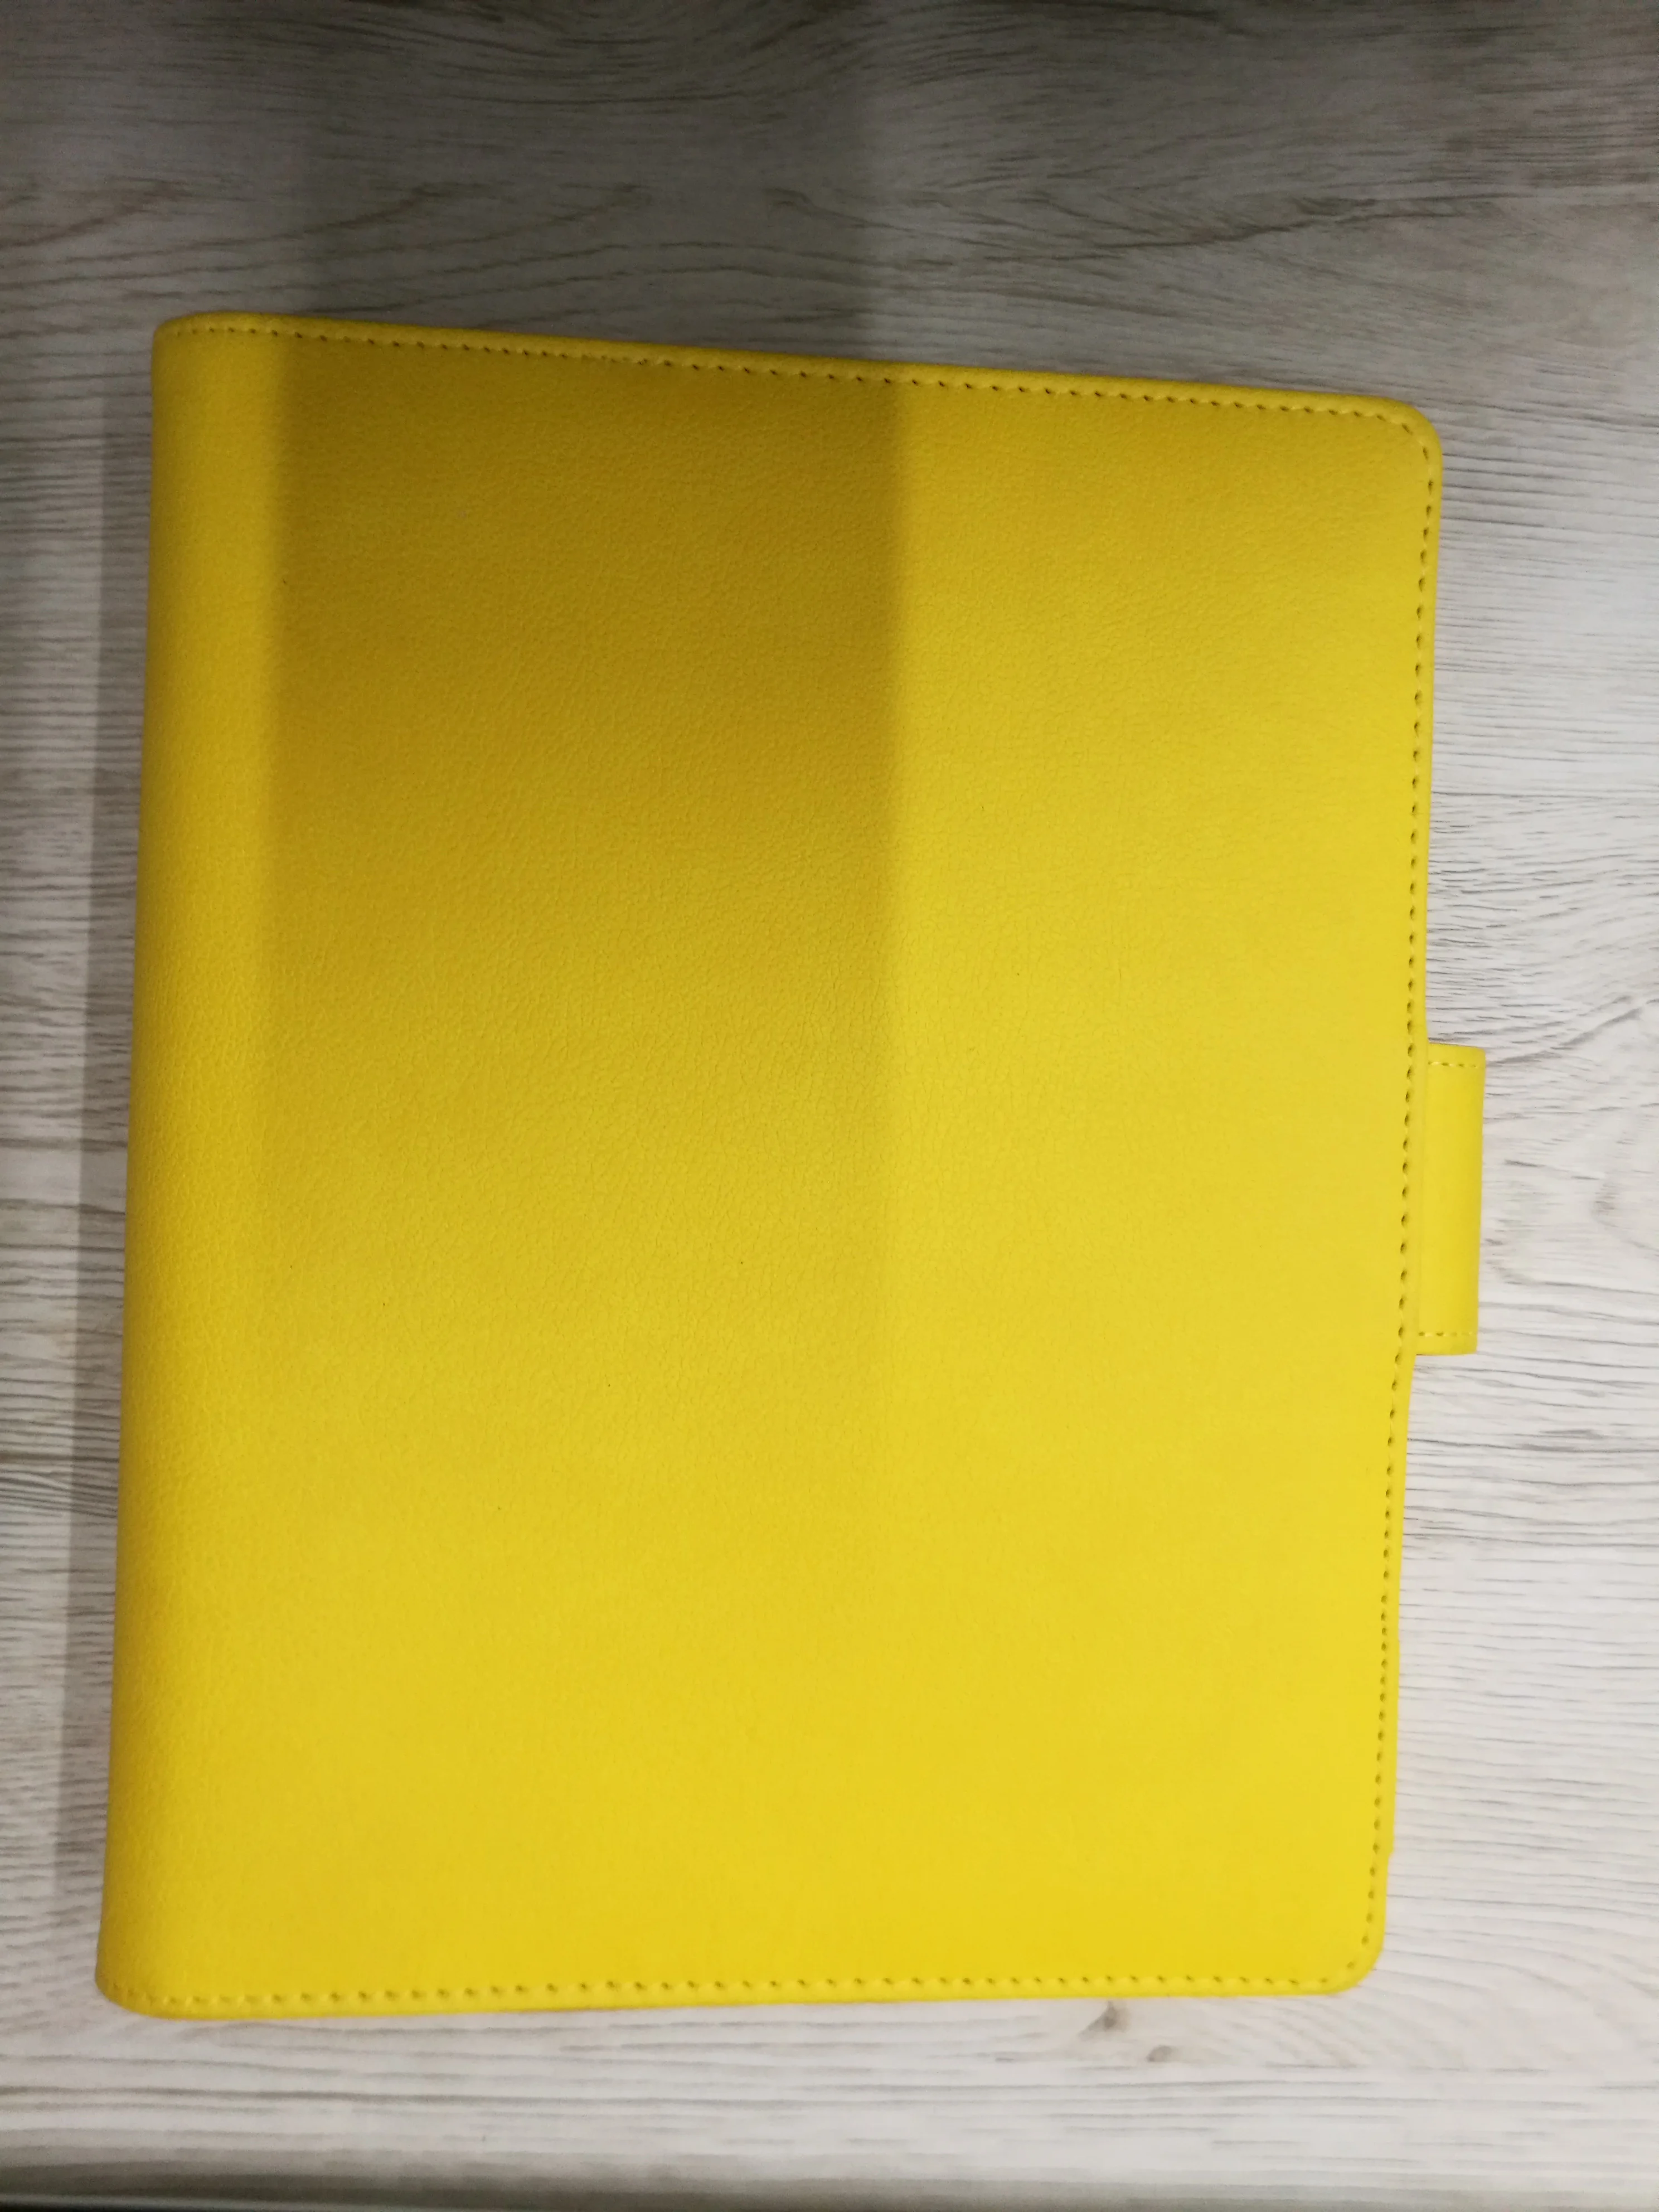 Pure Warm Yellow Soft PU Leather Cover A5 Coil Book Cover For Standard 6 Rings Loose Leaf Refilled Paper